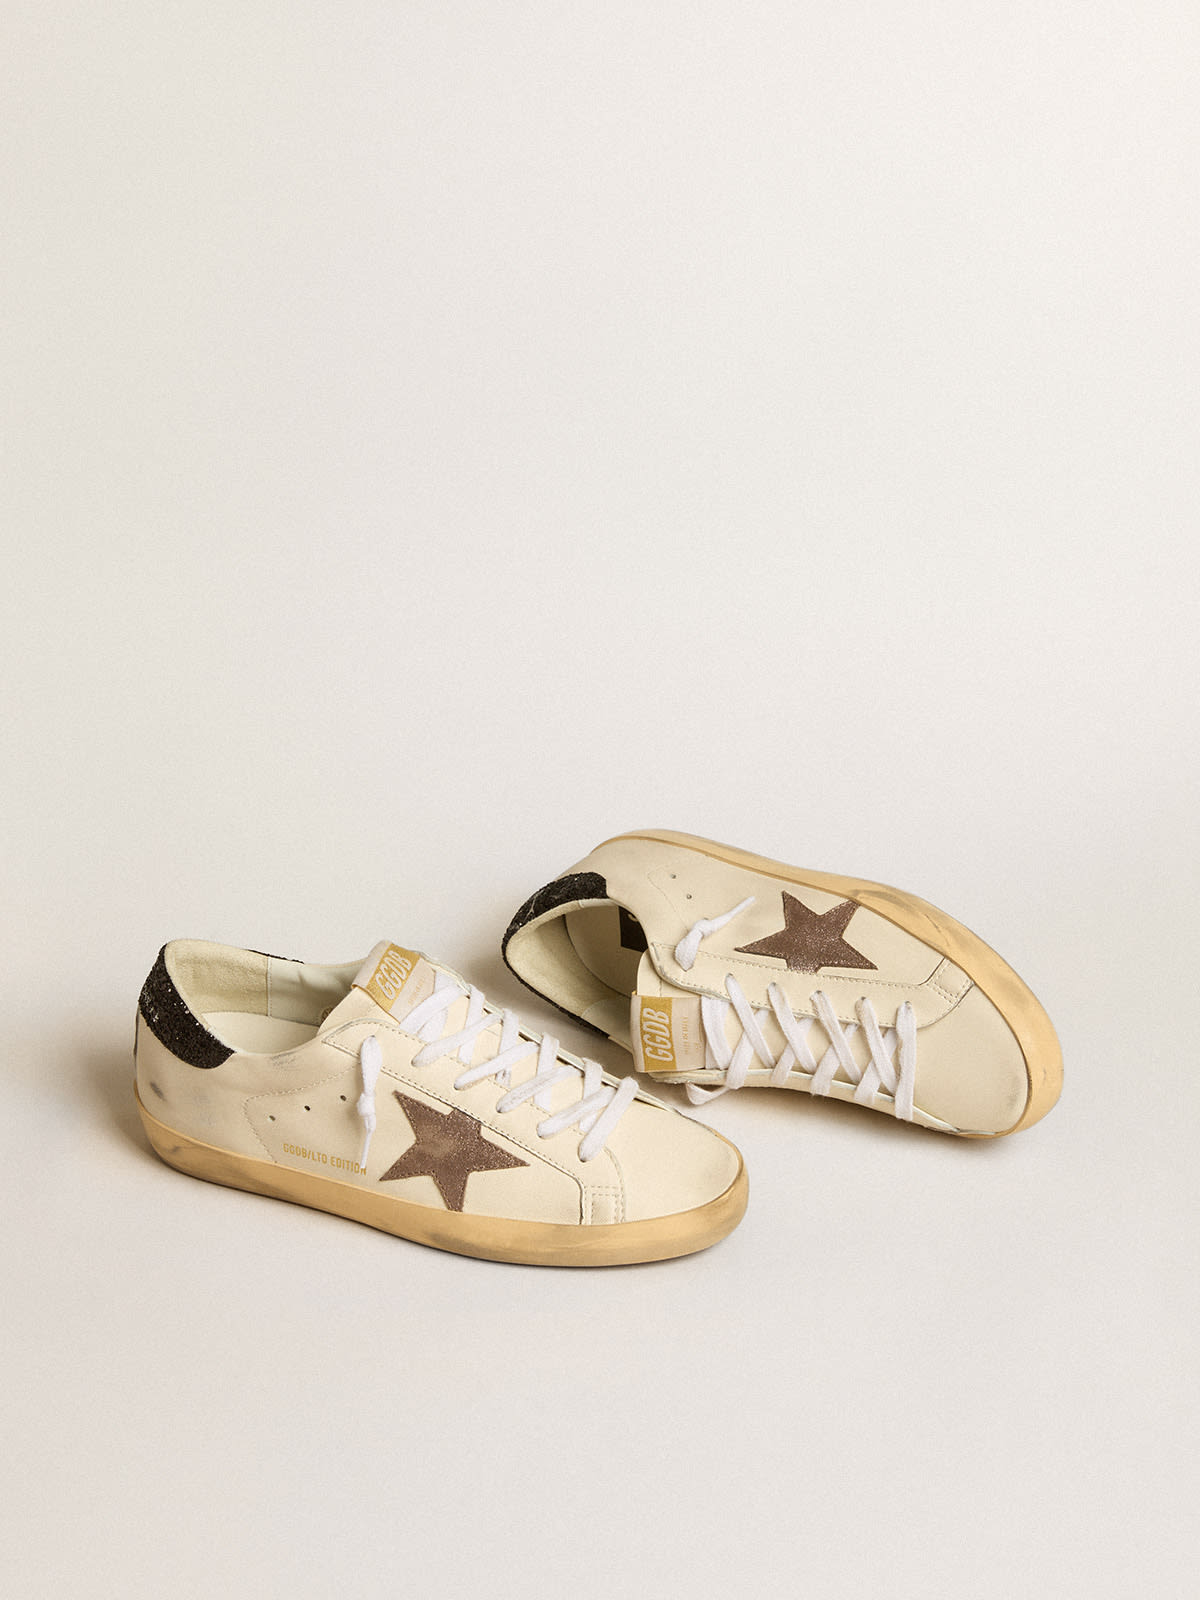 Golden Goose - Super-Star LTD with laminated leather star and black glitter heel tab in 